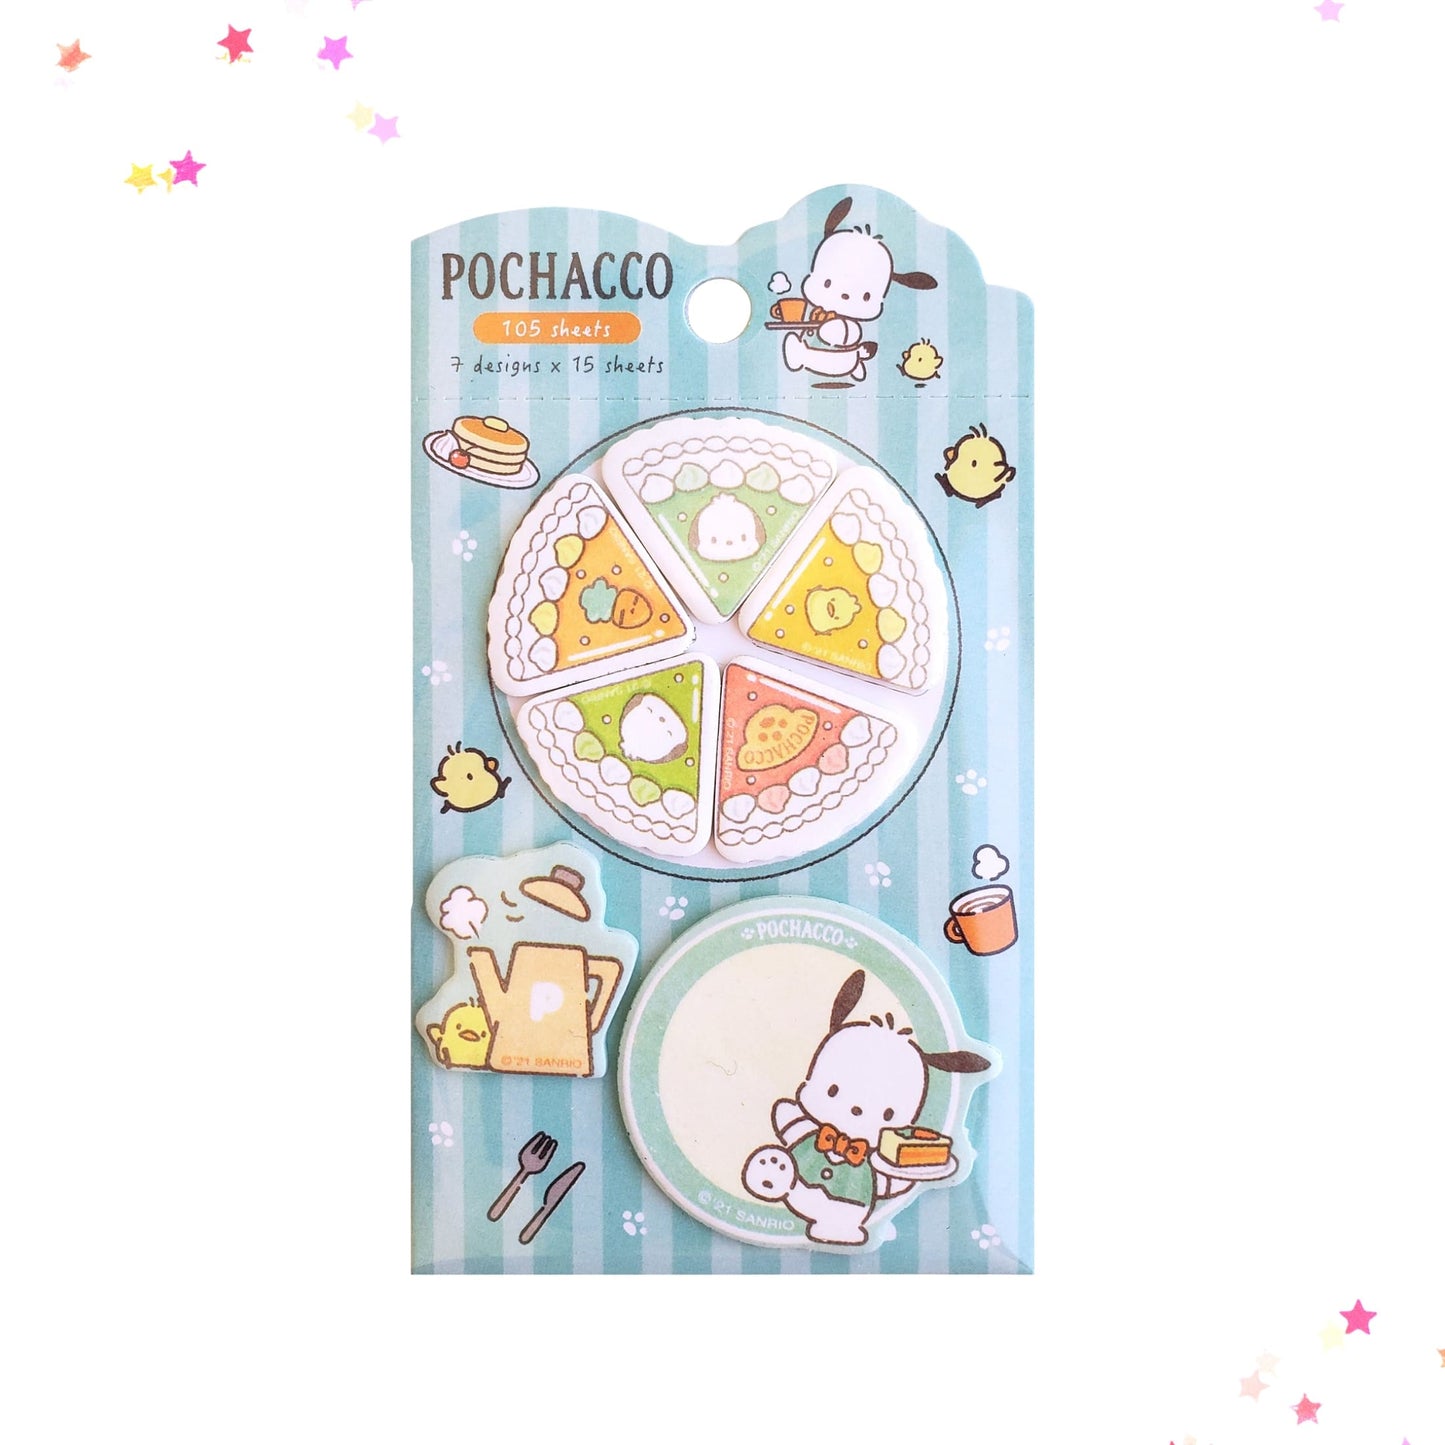 Sanrio Pochacco Cake Sticky Note Page Marker Set from Confetti Kitty, Only 5.99